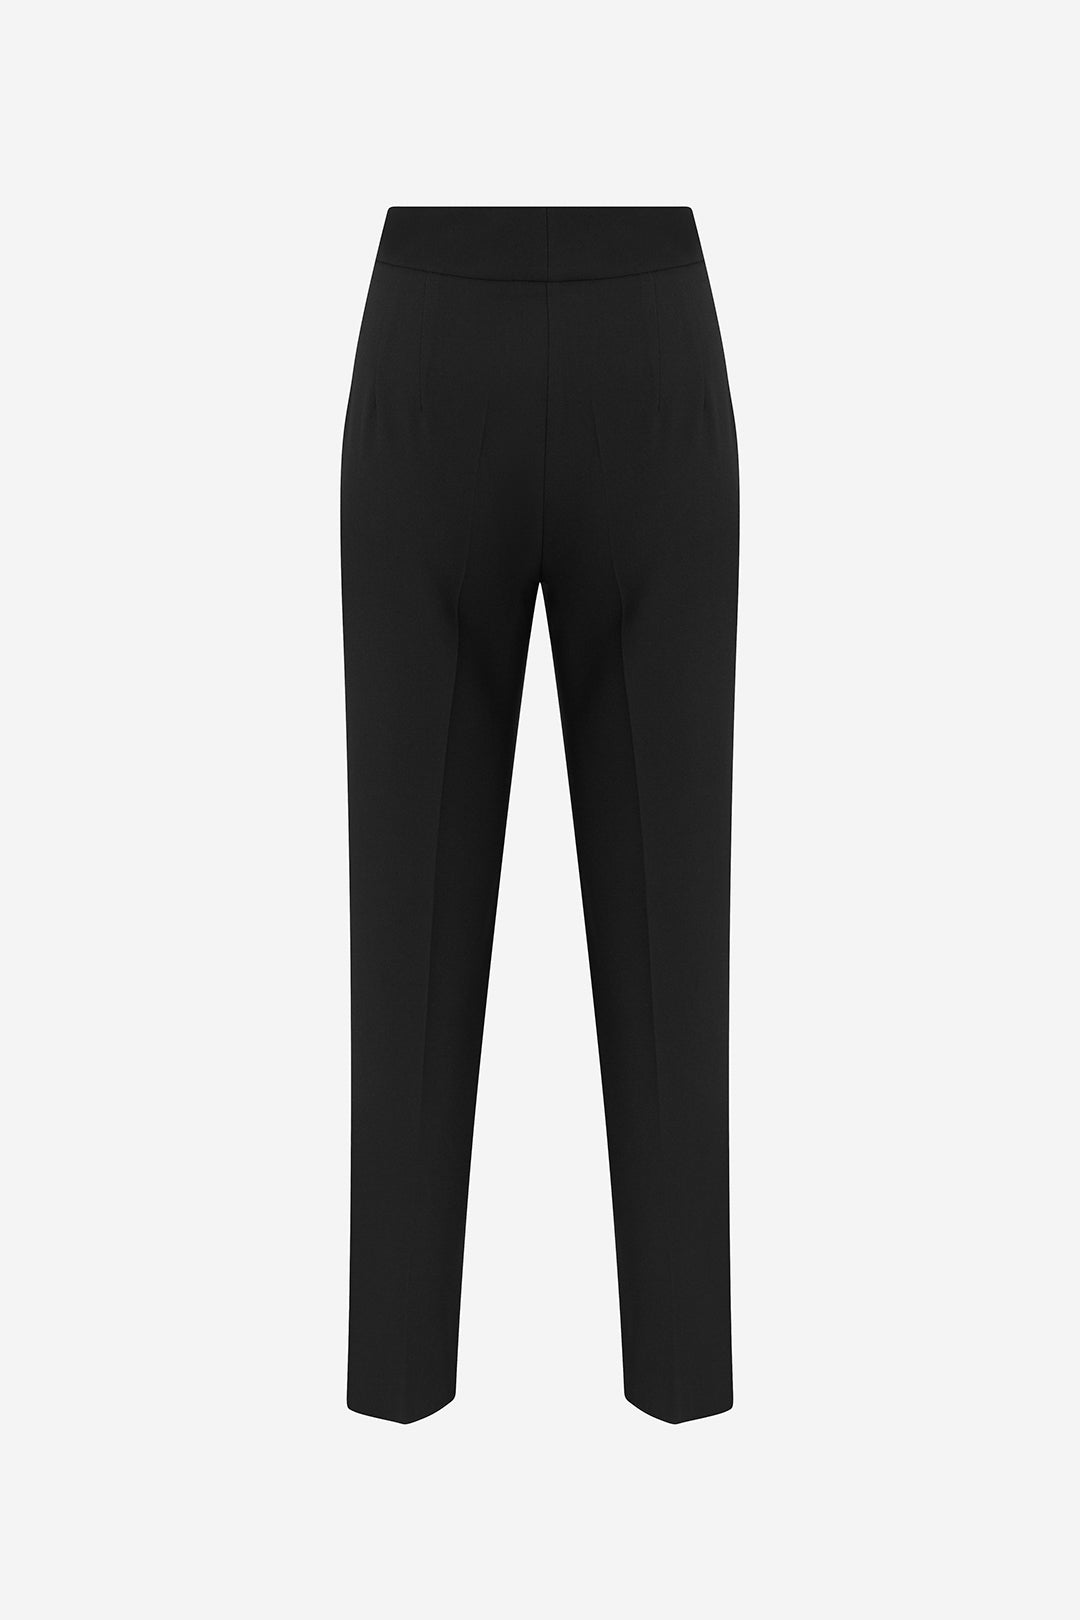 Laia - Pleated Trousers